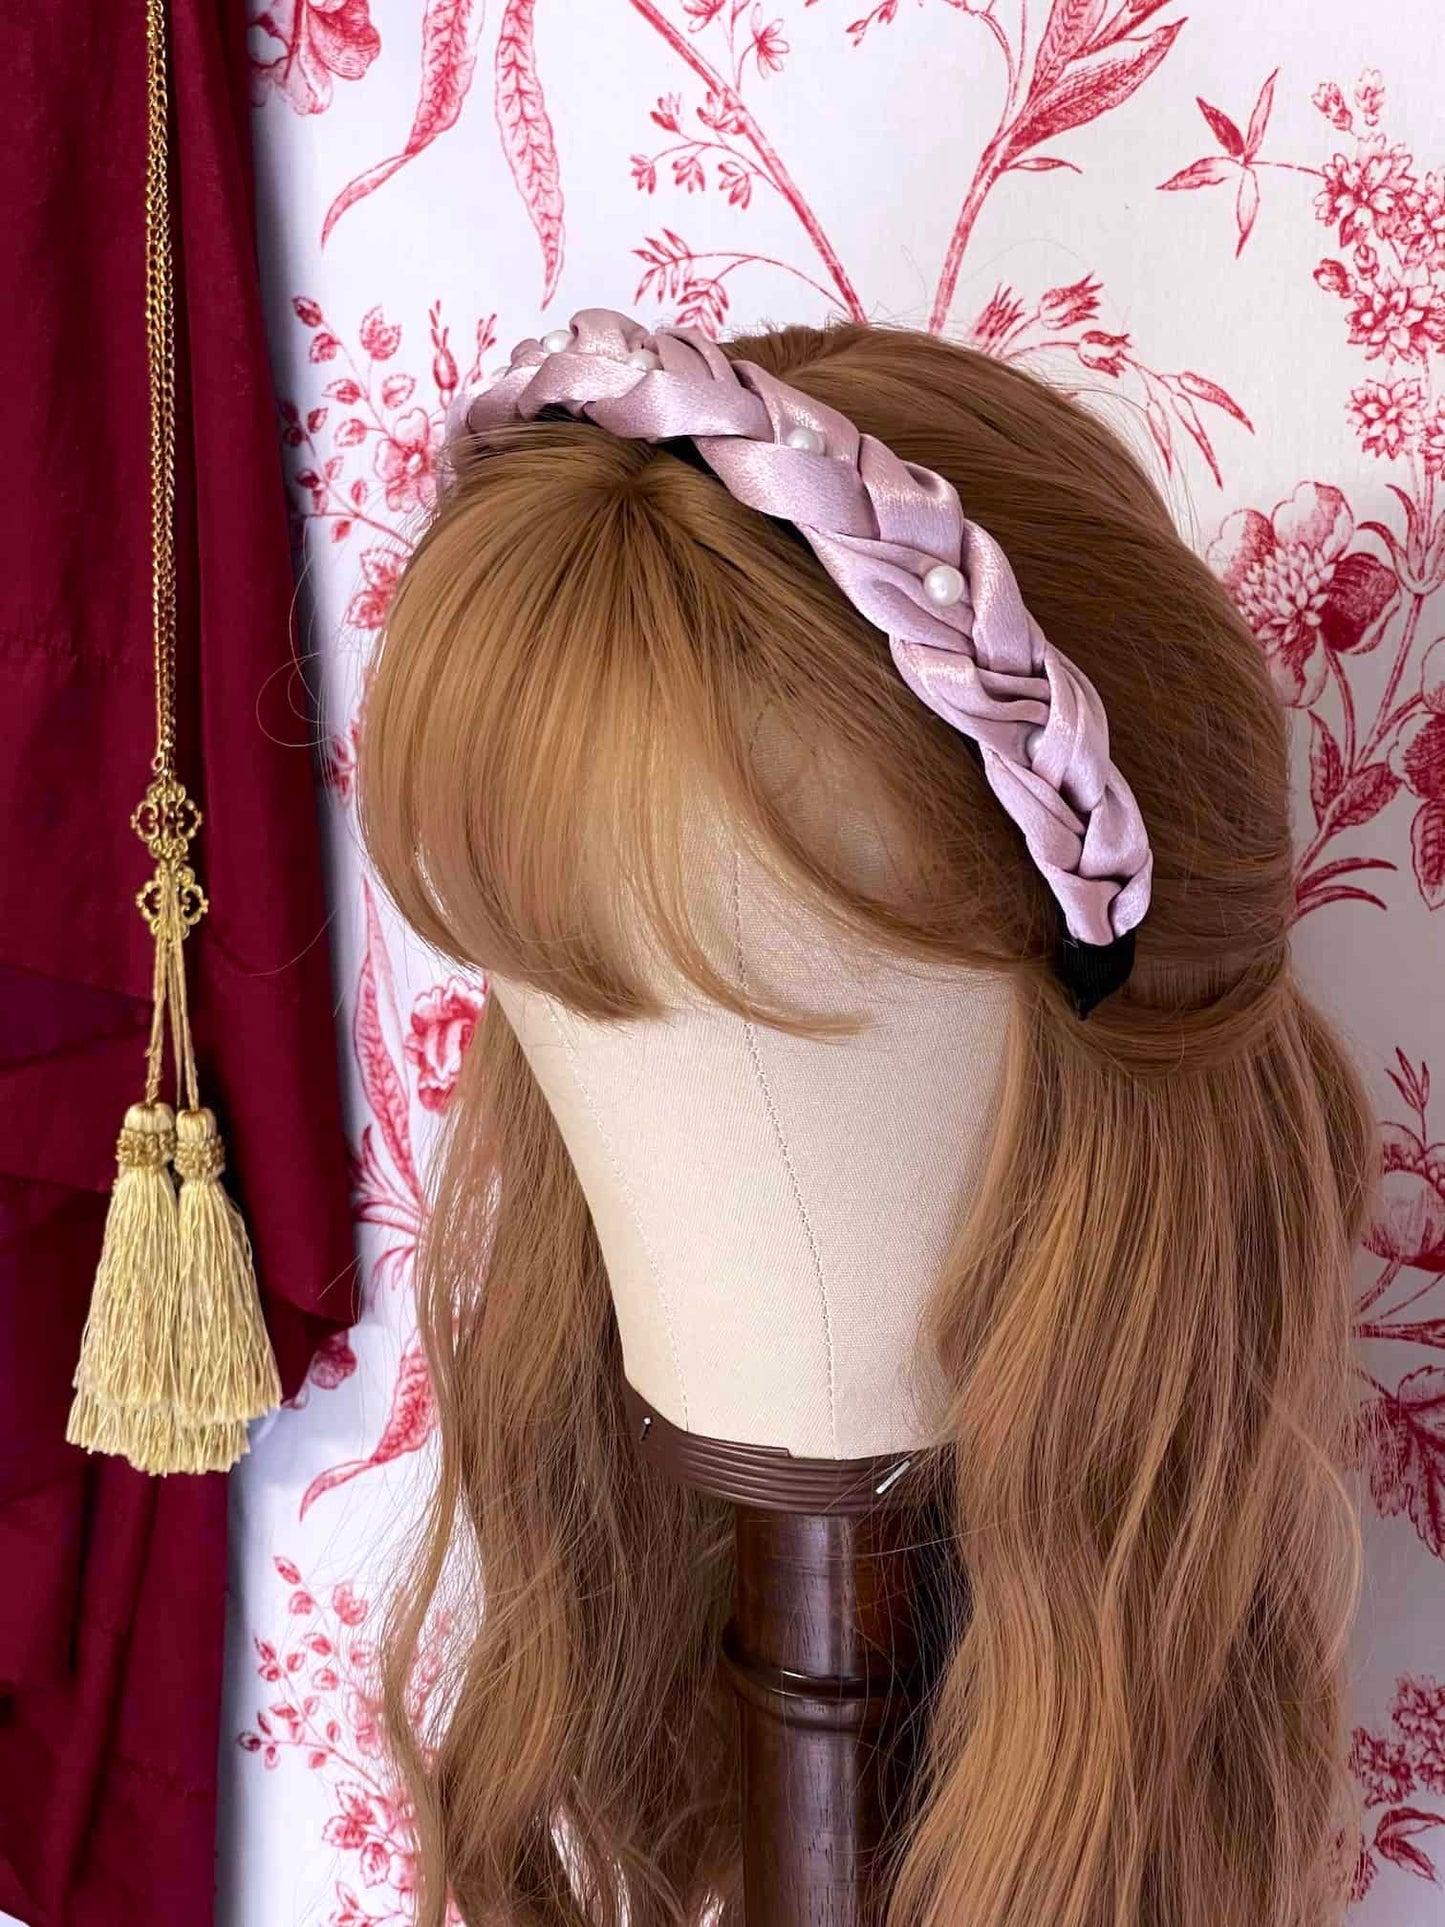 Historically Inspired Braided Satin Pearl Headband in Mauve for Edwardian, Victorian, Rococo, Regency, Baroque, and Renaissance fashion.